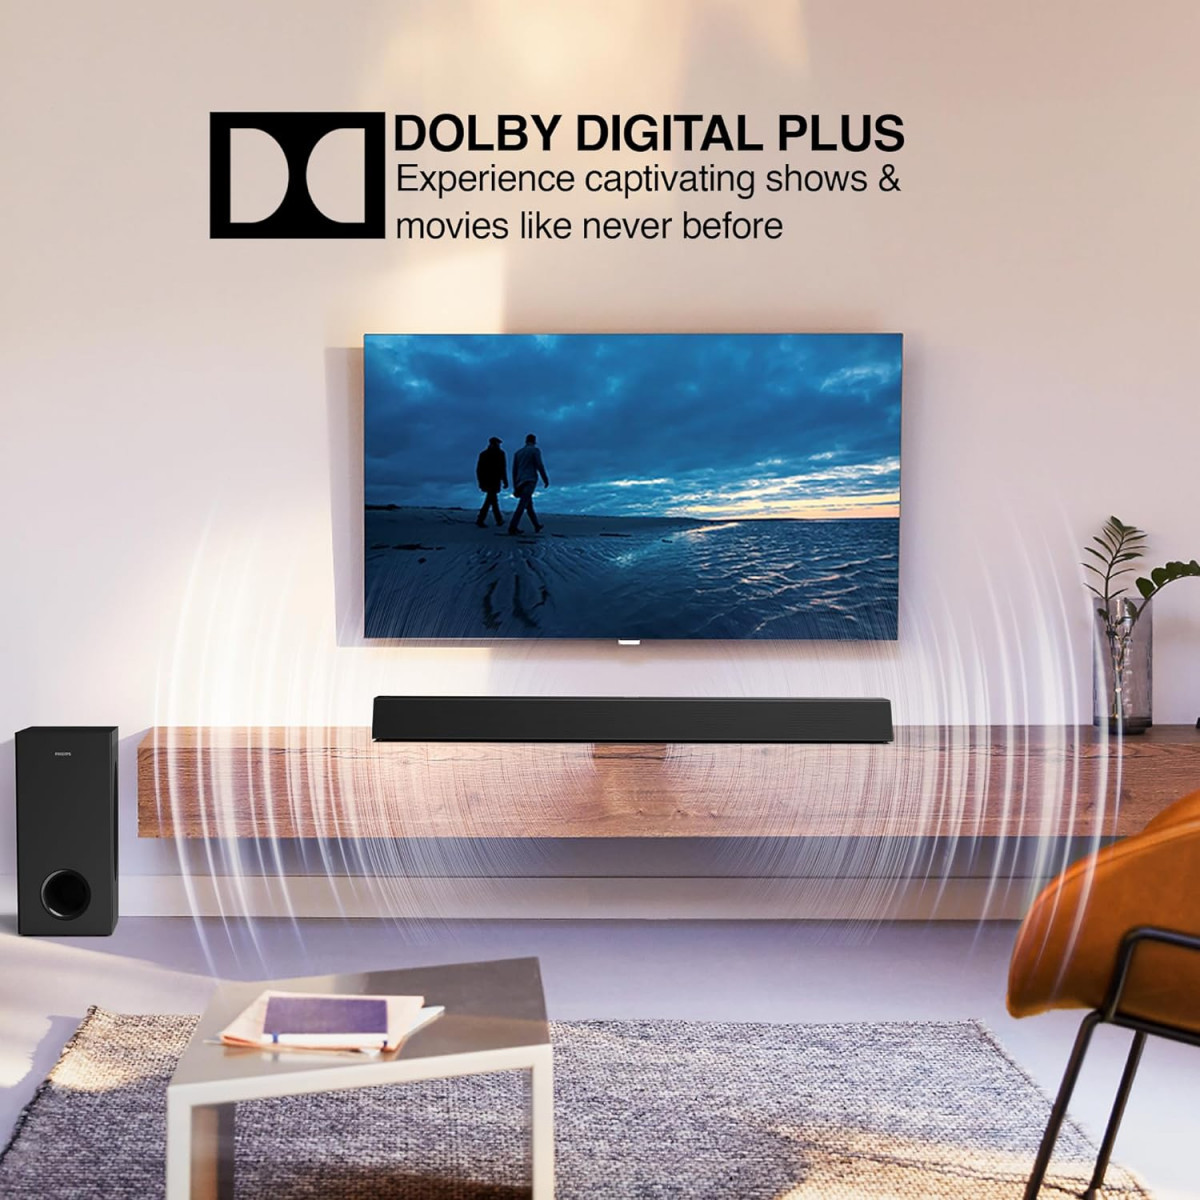 Philips TAB7007 21 CH 240W Dolby Digital Plus Bluetooth Soundbar V53 with Wireless subwoofer Multi-Connectivity Option with Supporting USB HDMI AUX  Remote Control Black